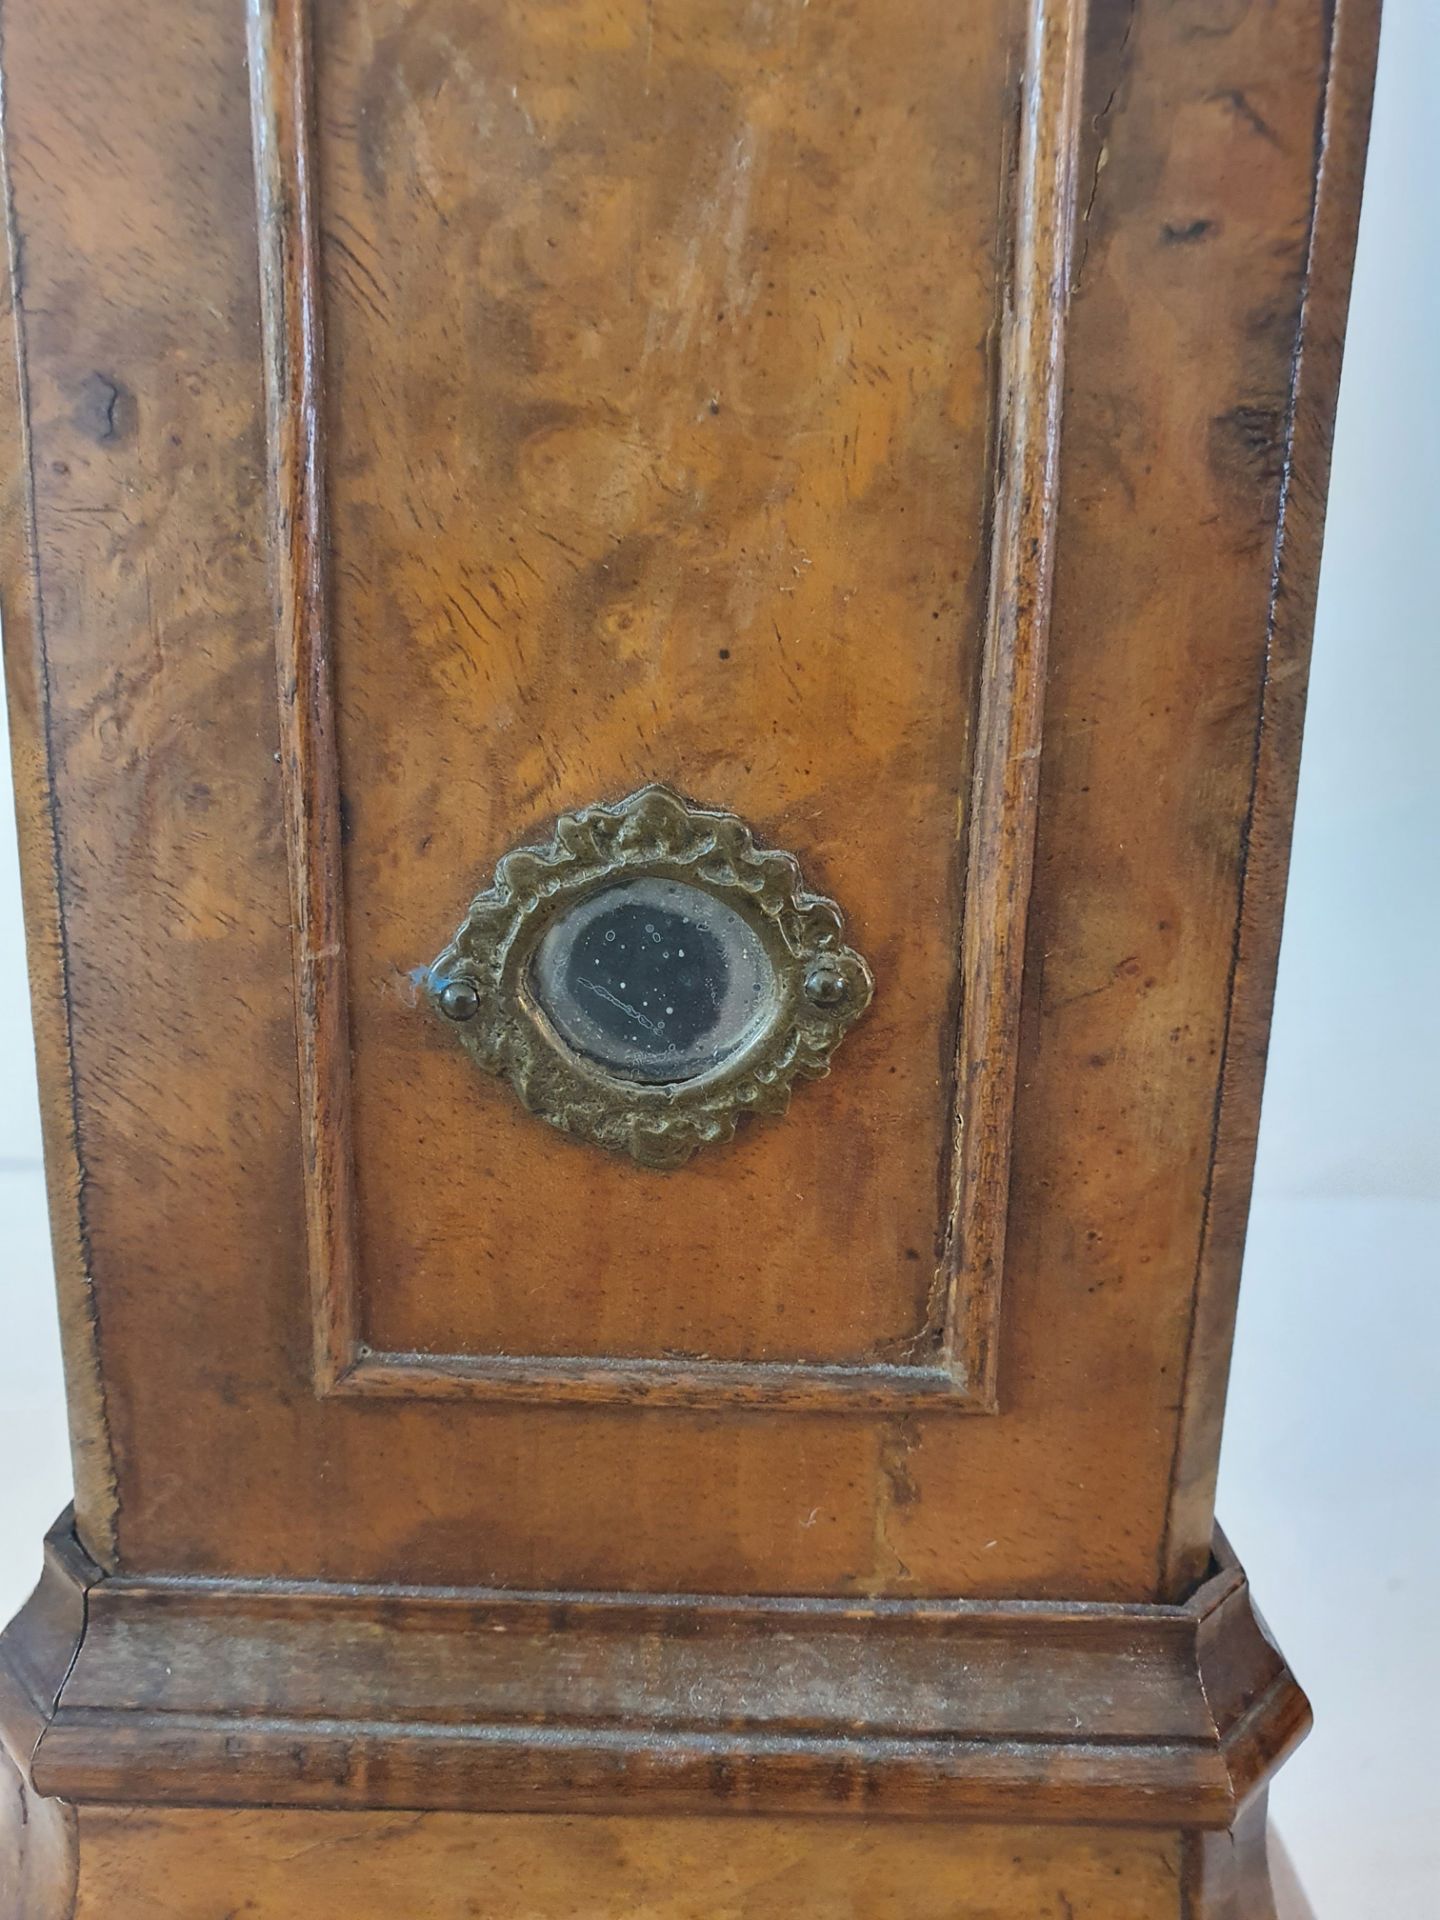 Early Miniature Clock Case with Hanging Pocket Watch Clock Face - Image 5 of 9